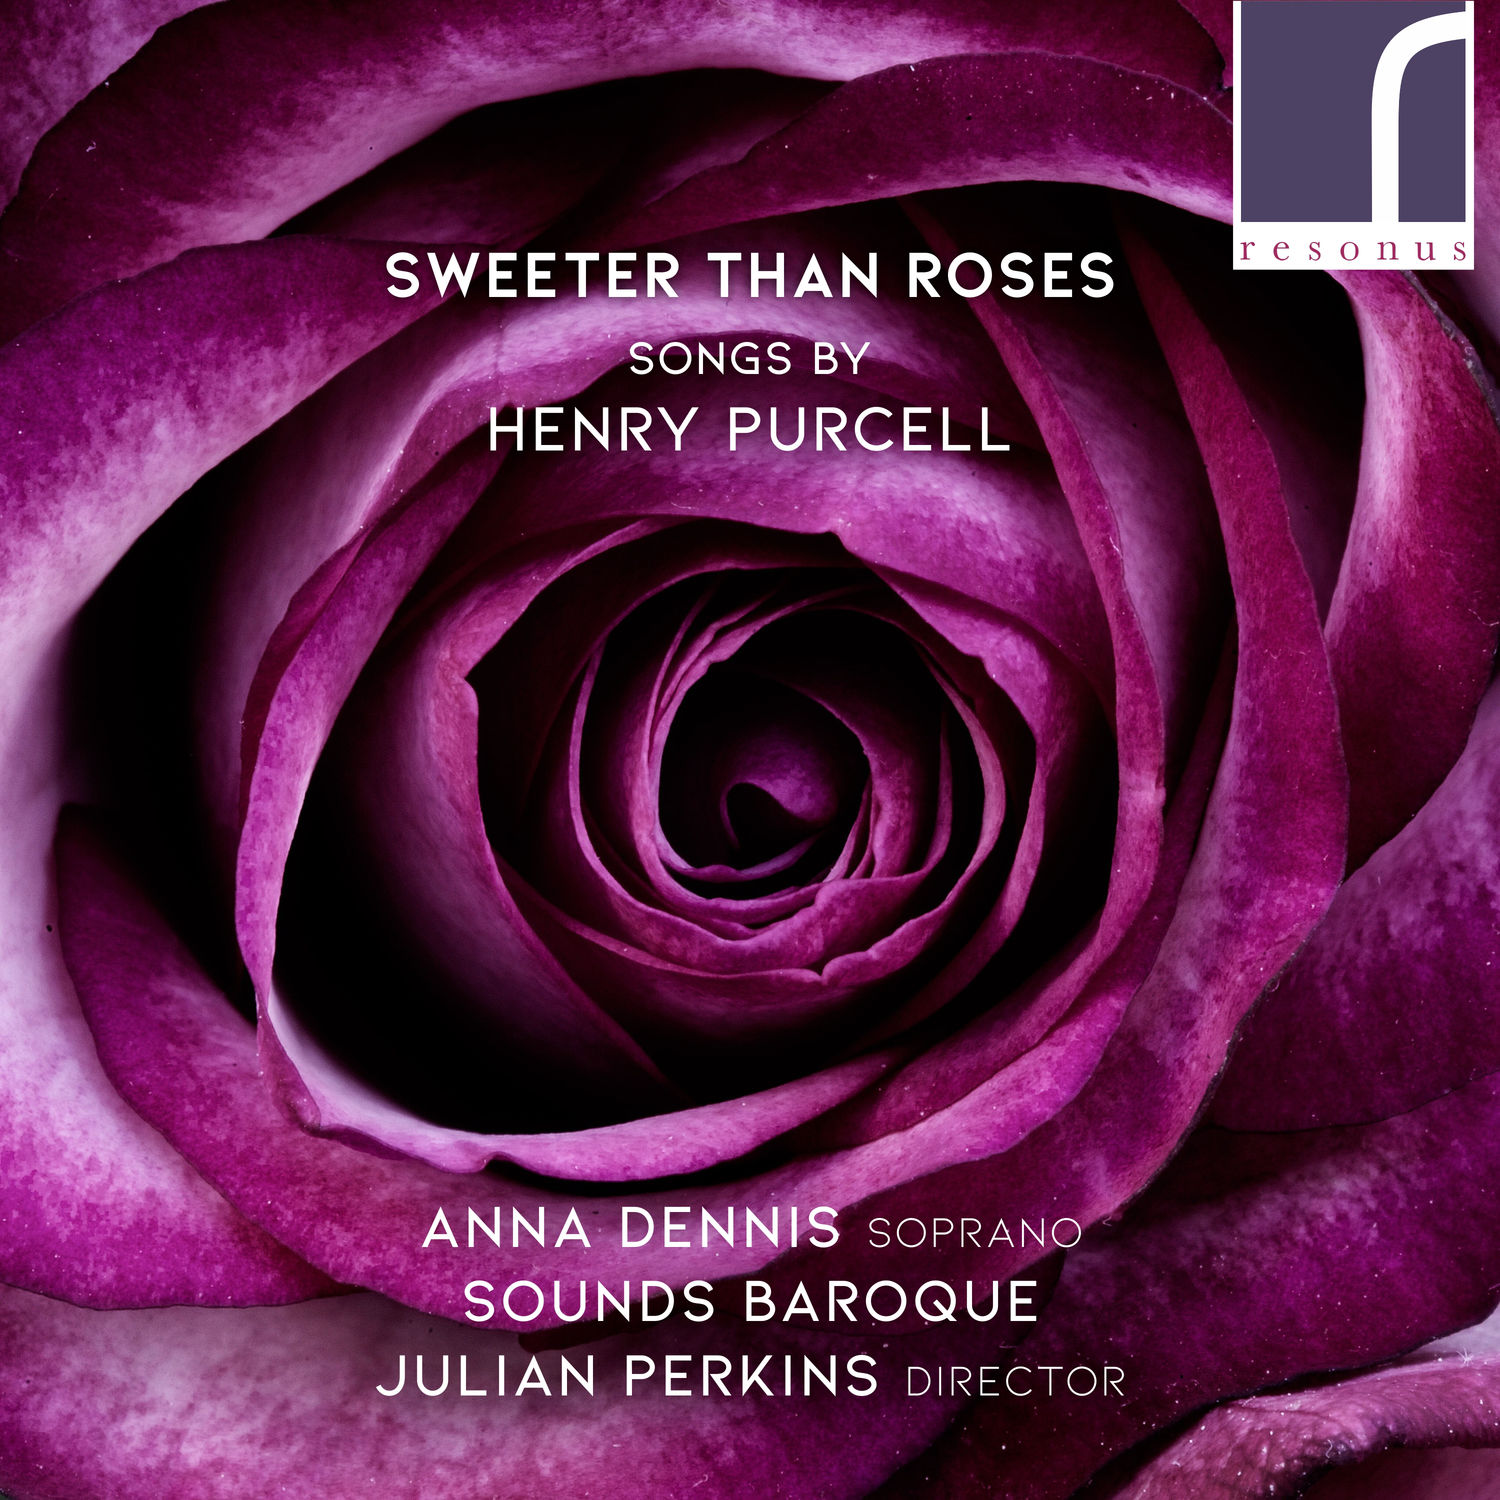 Anna Dennis, Sounds Baroque & Julian Perkins – Sweeter Than Roses: Songs by Henry Purcell (2019) [FLAC 24bit/96kHz]